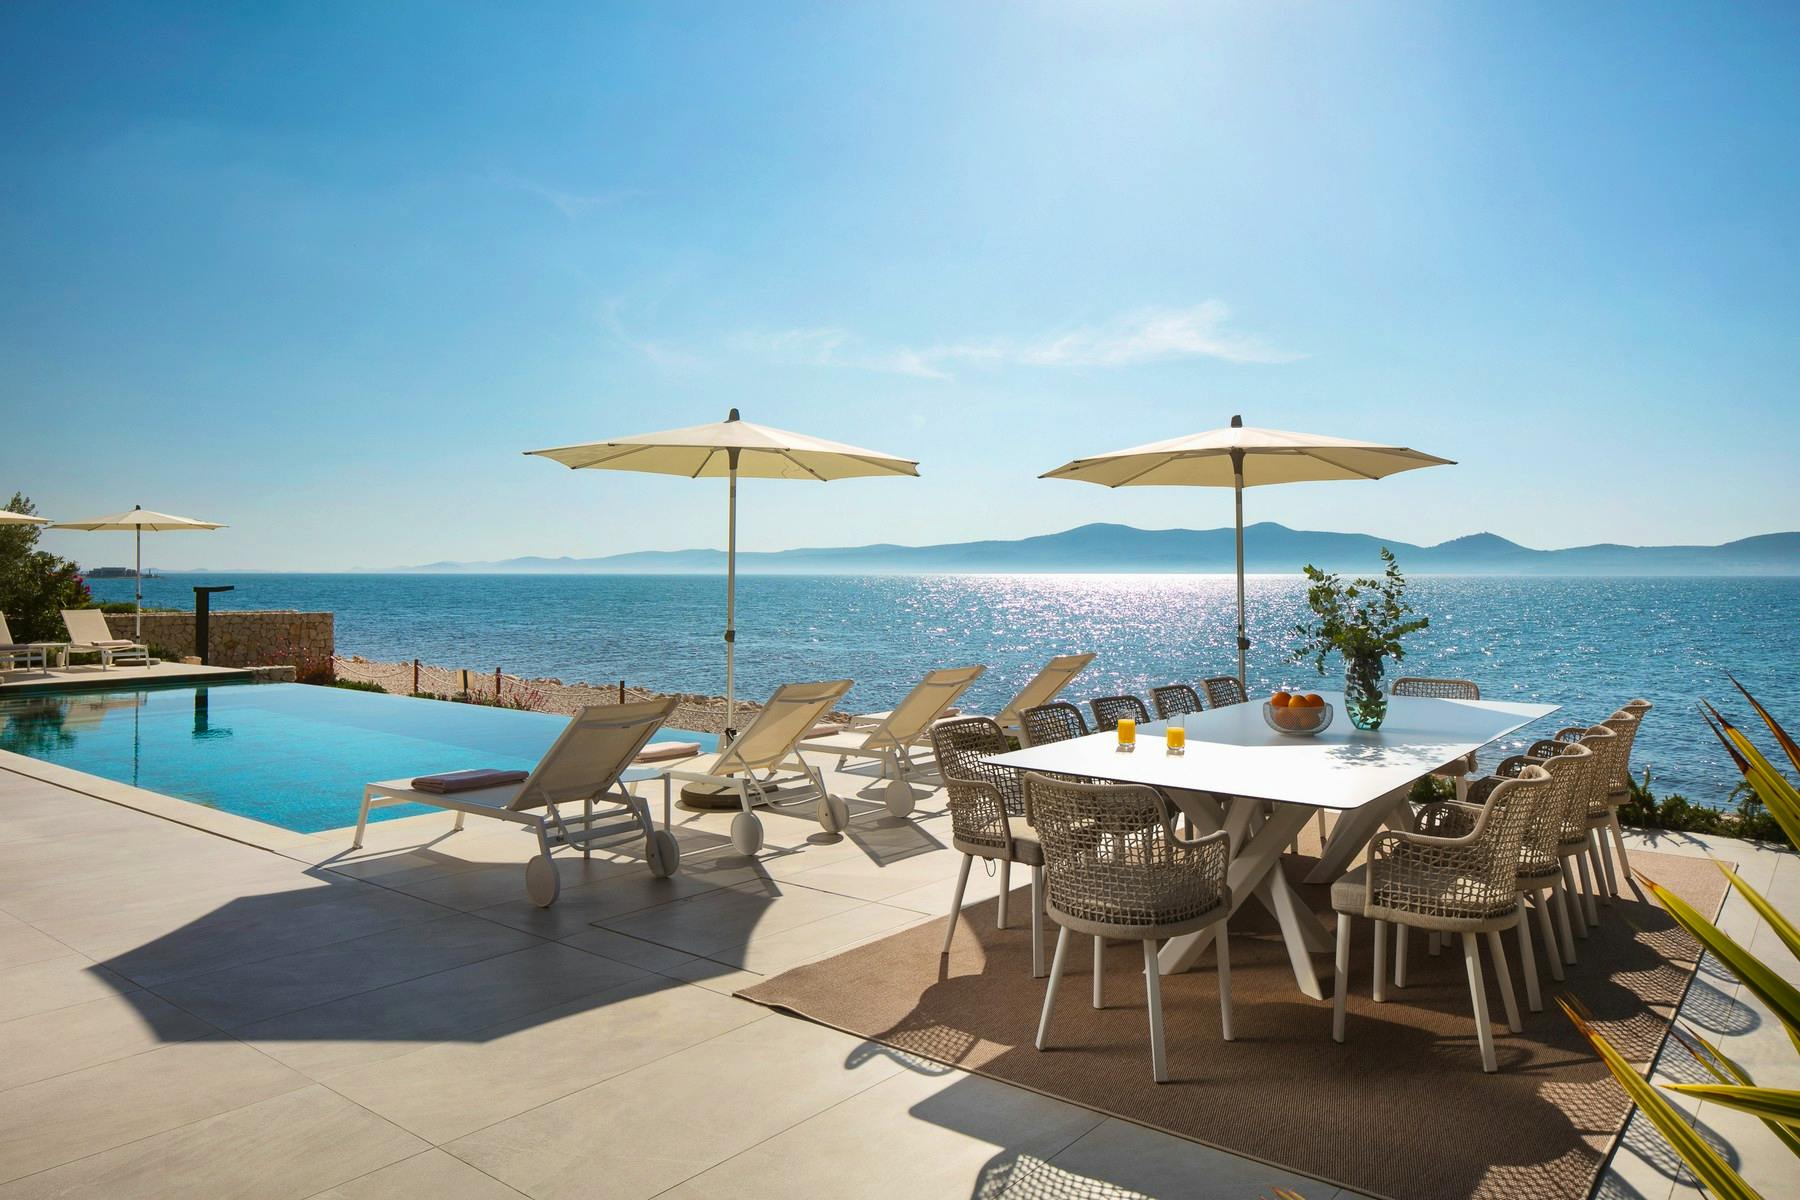 Spacious terrace with infinity pool and sundeck overlooking the sea